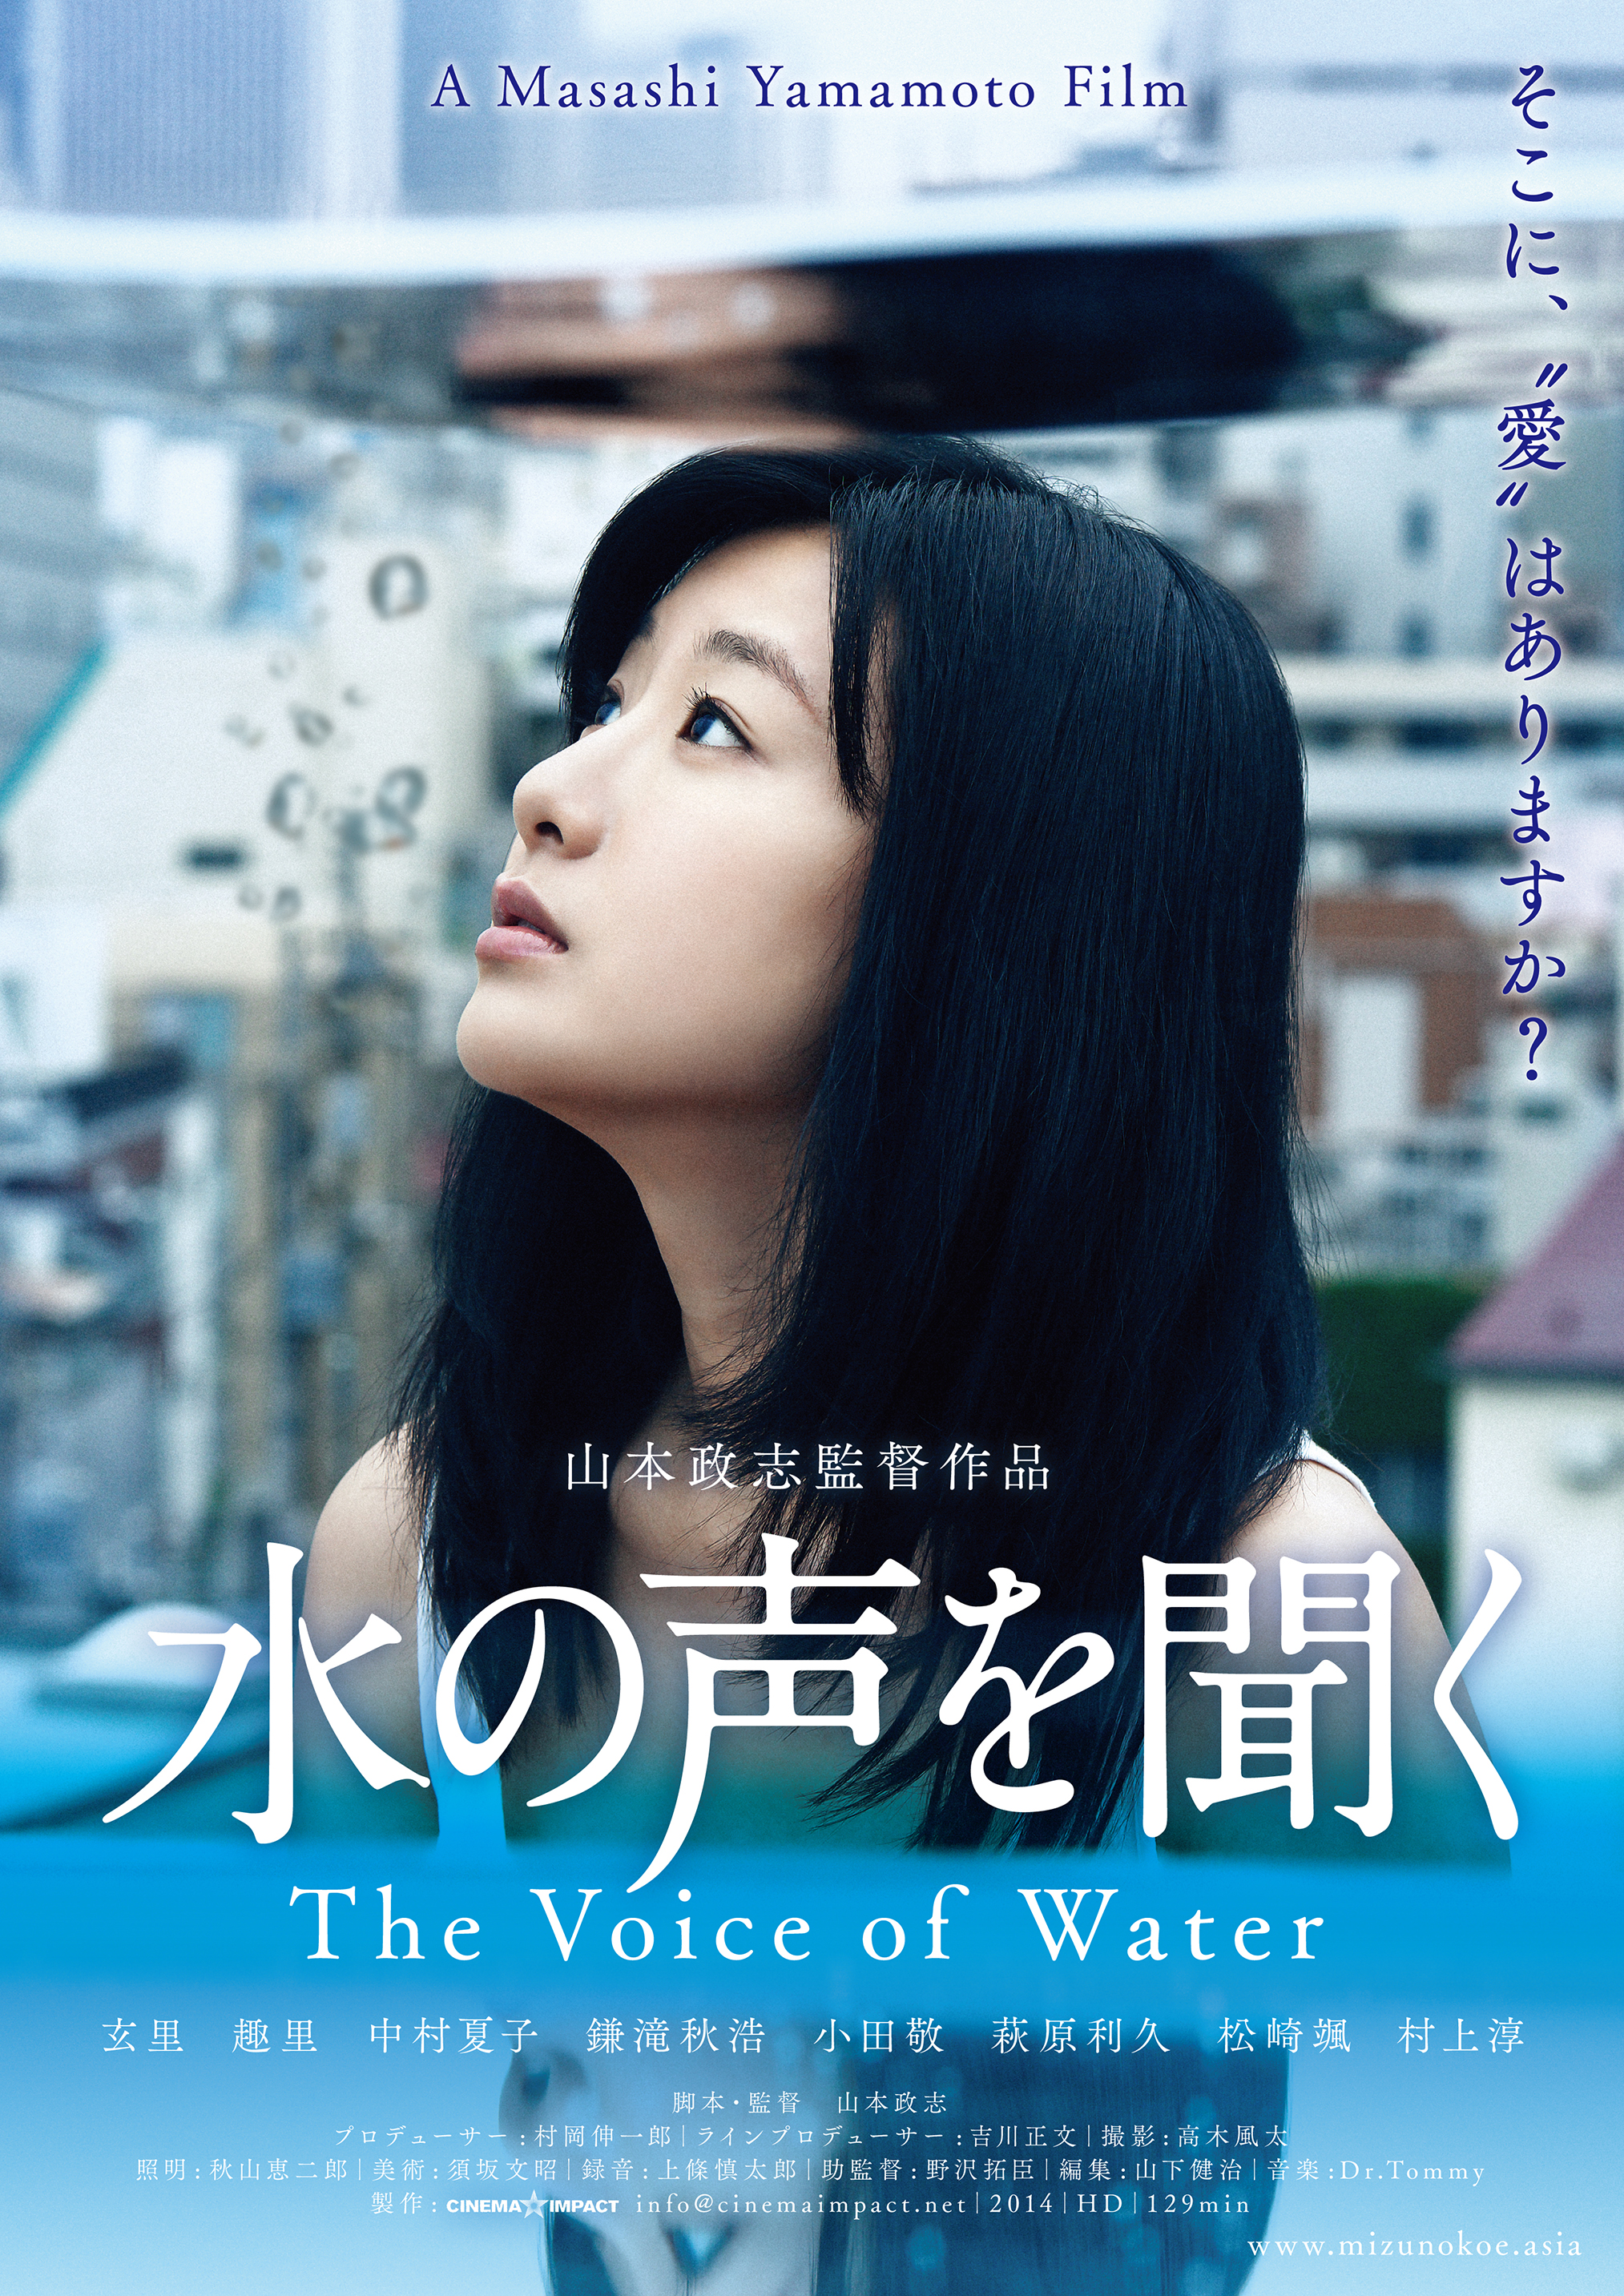 Japan Cuts 15 Interview The Voice Of Water Director Yamamoto Masashi Explores The Lure Of Cults And Blending Fact And Fiction